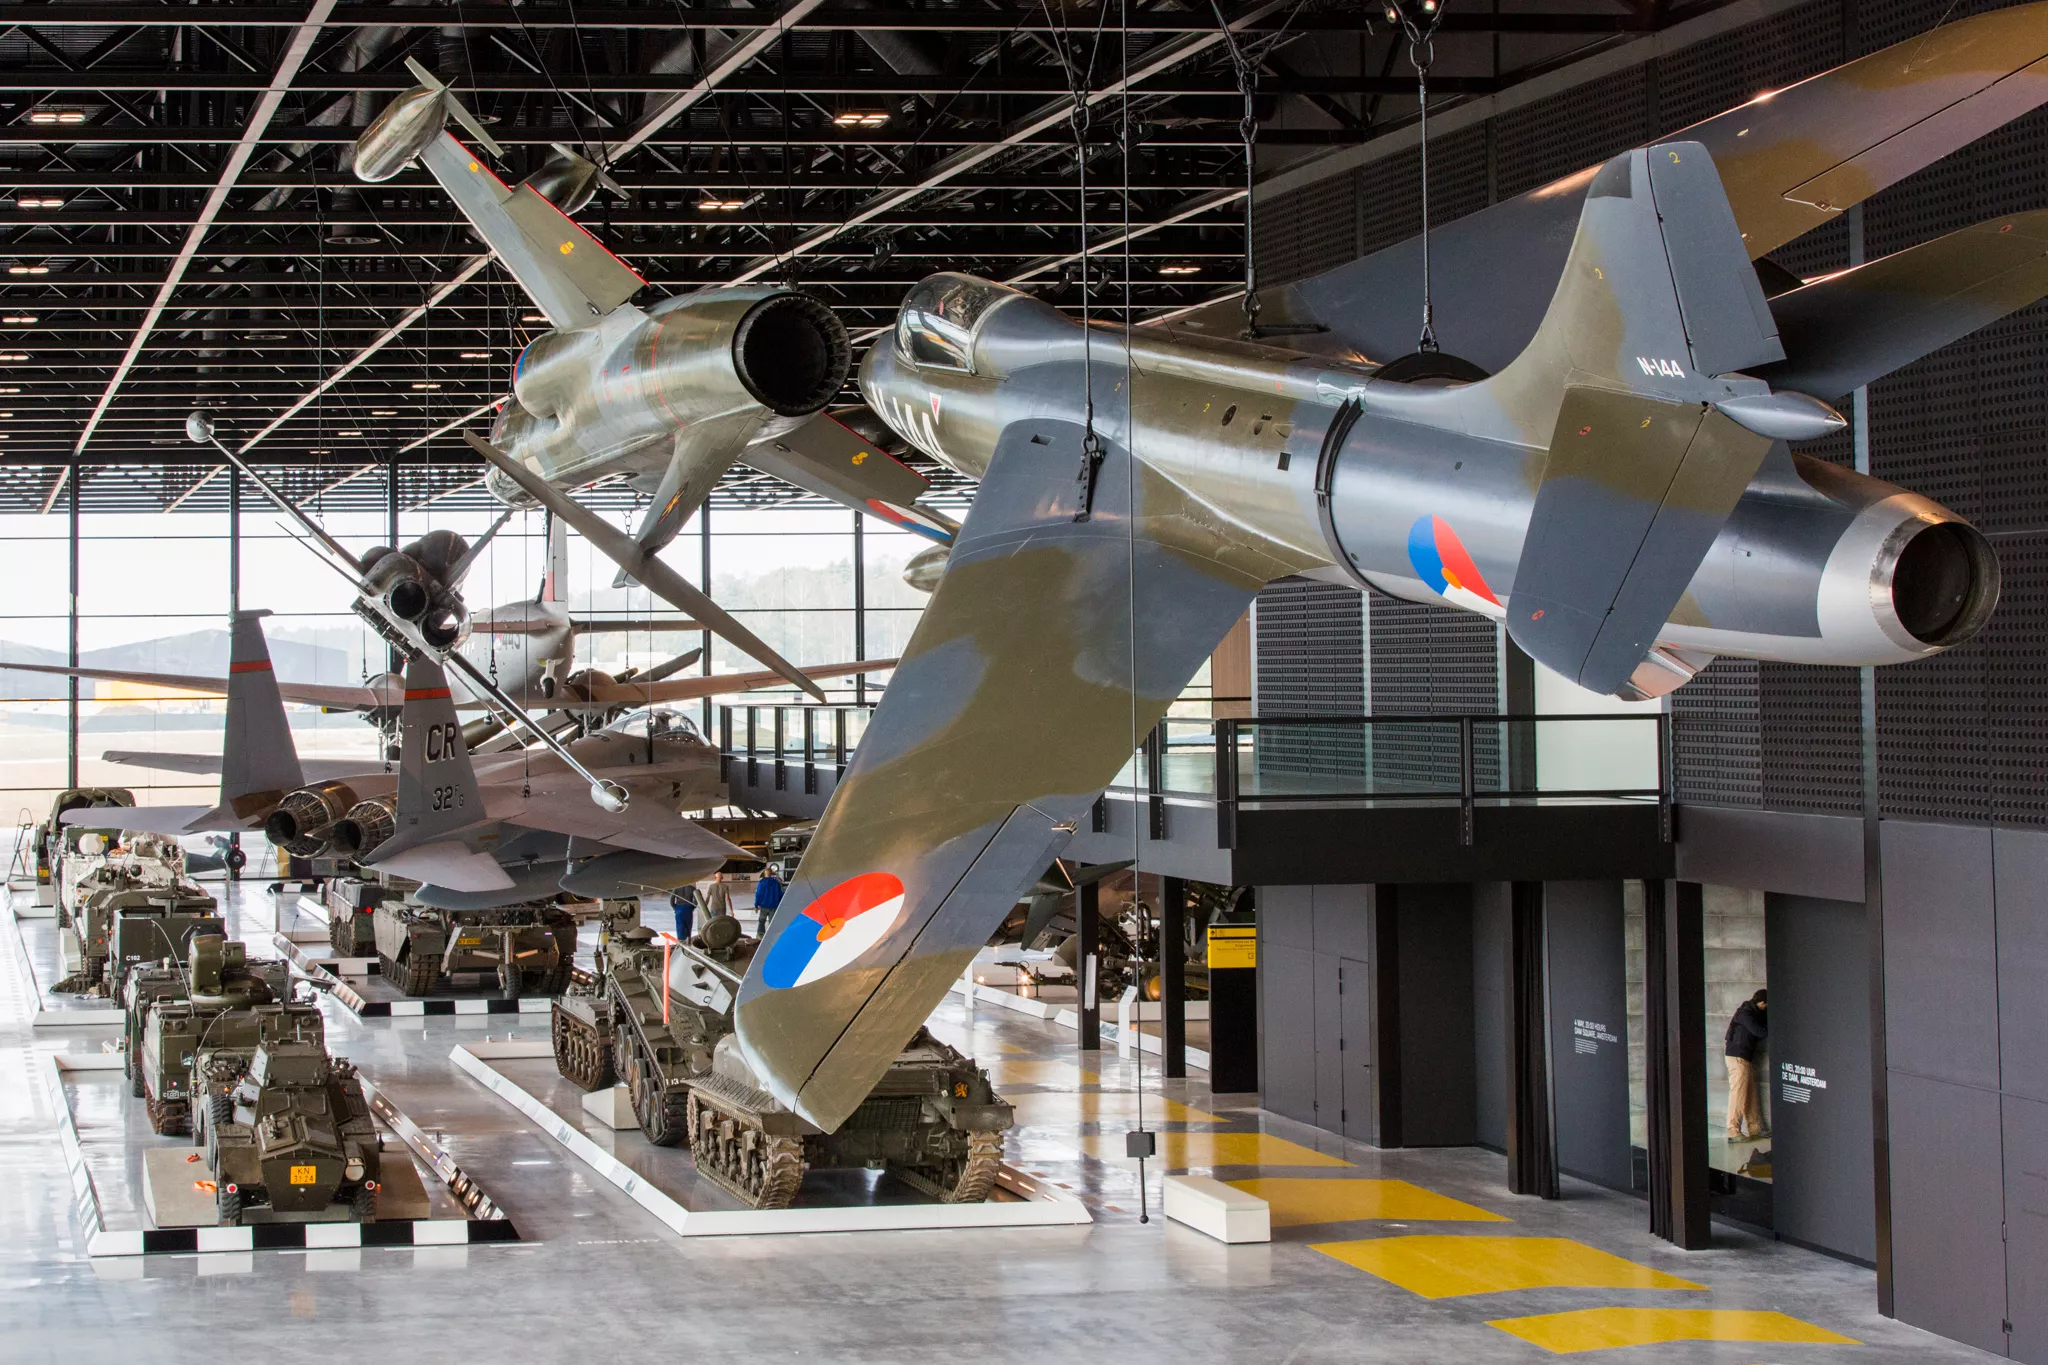 Nationaal Militair Museum in Netherlands, Europe | Museums - Rated 3.8